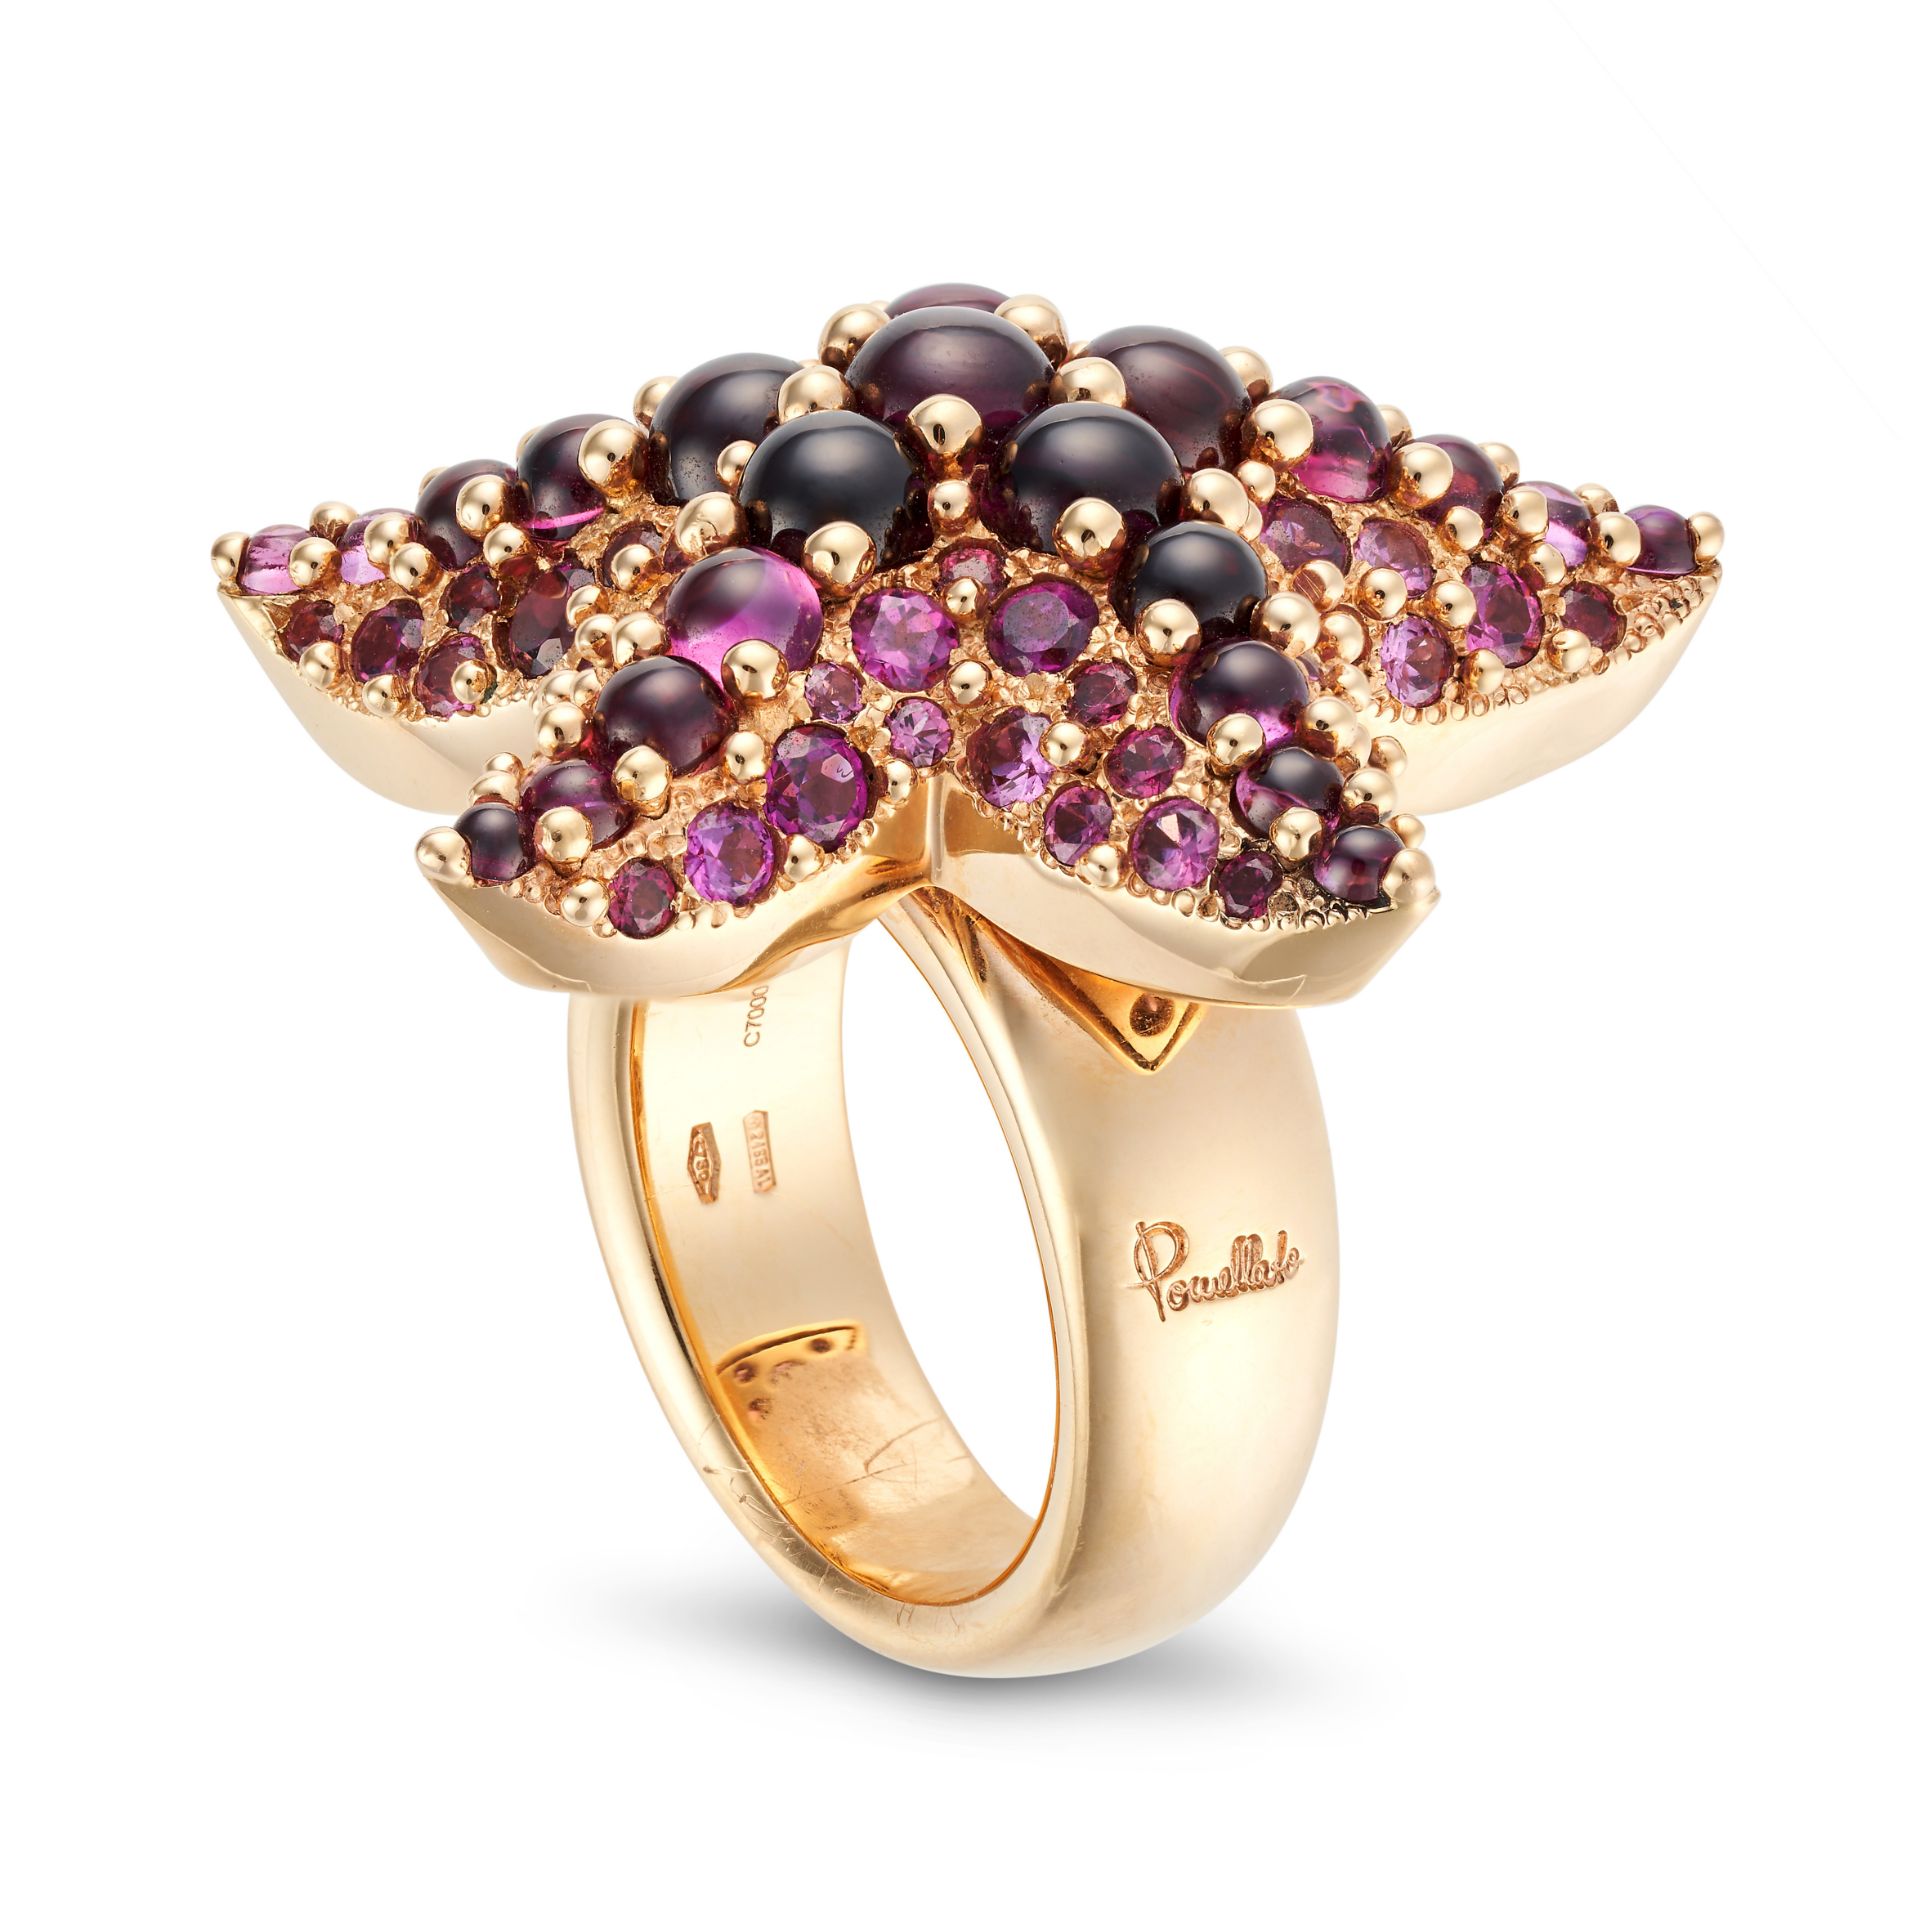 POMELLATO, A RHODOLITE GARNET STARFISH RING designed as a starfish set throughout with round cabo... - Image 2 of 2